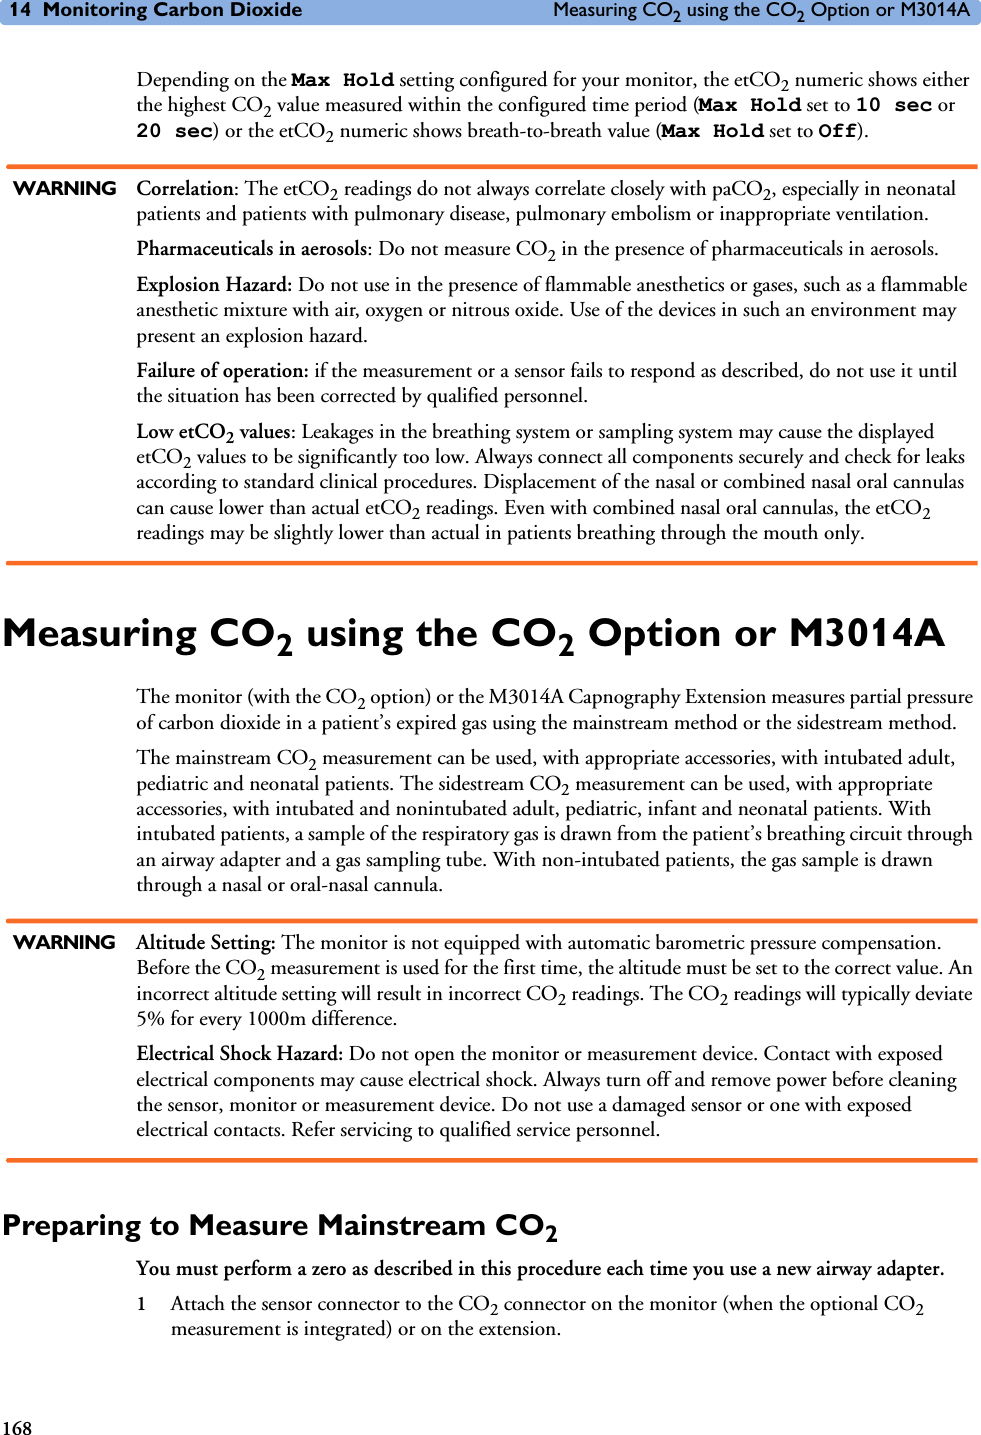 14 Monitoring Carbon Dioxide Measuring CO2 using the CO2 Option or M3014A168Depending on the Max Hold setting configured for your monitor, the etCO2 numeric shows either the highest CO2 value measured within the configured time period (Max Hold set to 10 sec or 20 sec) or the etCO2 numeric shows breath-to-breath value (Max Hold set to Off).WARNING Correlation: The etCO2 readings do not always correlate closely with paCO2, especially in neonatal patients and patients with pulmonary disease, pulmonary embolism or inappropriate ventilation.Pharmaceuticals in aerosols: Do not measure CO2 in the presence of pharmaceuticals in aerosols.Explosion Hazard: Do not use in the presence of flammable anesthetics or gases, such as a flammable anesthetic mixture with air, oxygen or nitrous oxide. Use of the devices in such an environment may present an explosion hazard.Failure of operation: if the measurement or a sensor fails to respond as described, do not use it until the situation has been corrected by qualified personnel.Low etCO2 values: Leakages in the breathing system or sampling system may cause the displayed etCO2 values to be significantly too low. Always connect all components securely and check for leaks according to standard clinical procedures. Displacement of the nasal or combined nasal oral cannulas can cause lower than actual etCO2 readings. Even with combined nasal oral cannulas, the etCO2 readings may be slightly lower than actual in patients breathing through the mouth only.Measuring CO2 using the CO2 Option or M3014AThe monitor (with the CO2 option) or the M3014A Capnography Extension measures partial pressure of carbon dioxide in a patient’s expired gas using the mainstream method or the sidestream method. The mainstream CO2 measurement can be used, with appropriate accessories, with intubated adult, pediatric and neonatal patients. The sidestream CO2 measurement can be used, with appropriate accessories, with intubated and nonintubated adult, pediatric, infant and neonatal patients. With intubated patients, a sample of the respiratory gas is drawn from the patient’s breathing circuit through an airway adapter and a gas sampling tube. With non-intubated patients, the gas sample is drawn through a nasal or oral-nasal cannula.WARNING Altitude Setting: The monitor is not equipped with automatic barometric pressure compensation. Before the CO2 measurement is used for the first time, the altitude must be set to the correct value. An incorrect altitude setting will result in incorrect CO2 readings. The CO2 readings will typically deviate 5% for every 1000m difference.Electrical Shock Hazard: Do not open the monitor or measurement device. Contact with exposed electrical components may cause electrical shock. Always turn off and remove power before cleaning the sensor, monitor or measurement device. Do not use a damaged sensor or one with exposed electrical contacts. Refer servicing to qualified service personnel.Preparing to Measure Mainstream CO2You must perform a zero as described in this procedure each time you use a new airway adapter.1Attach the sensor connector to the CO2 connector on the monitor (when the optional CO2 measurement is integrated) or on the extension.